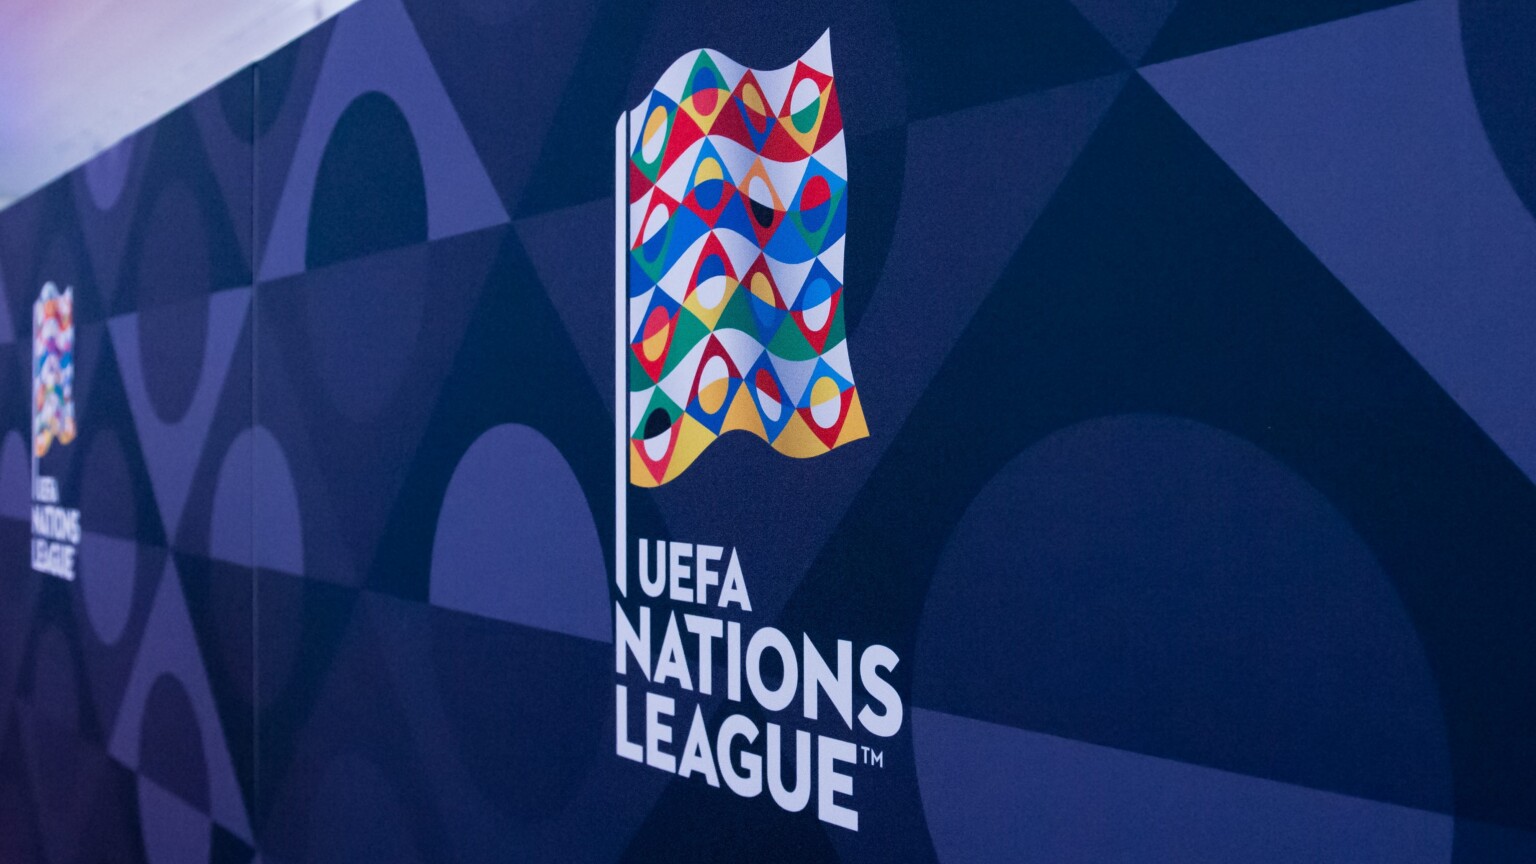 How to Watch UEFA Nations League 2020-2021: Schedule, Live Stream